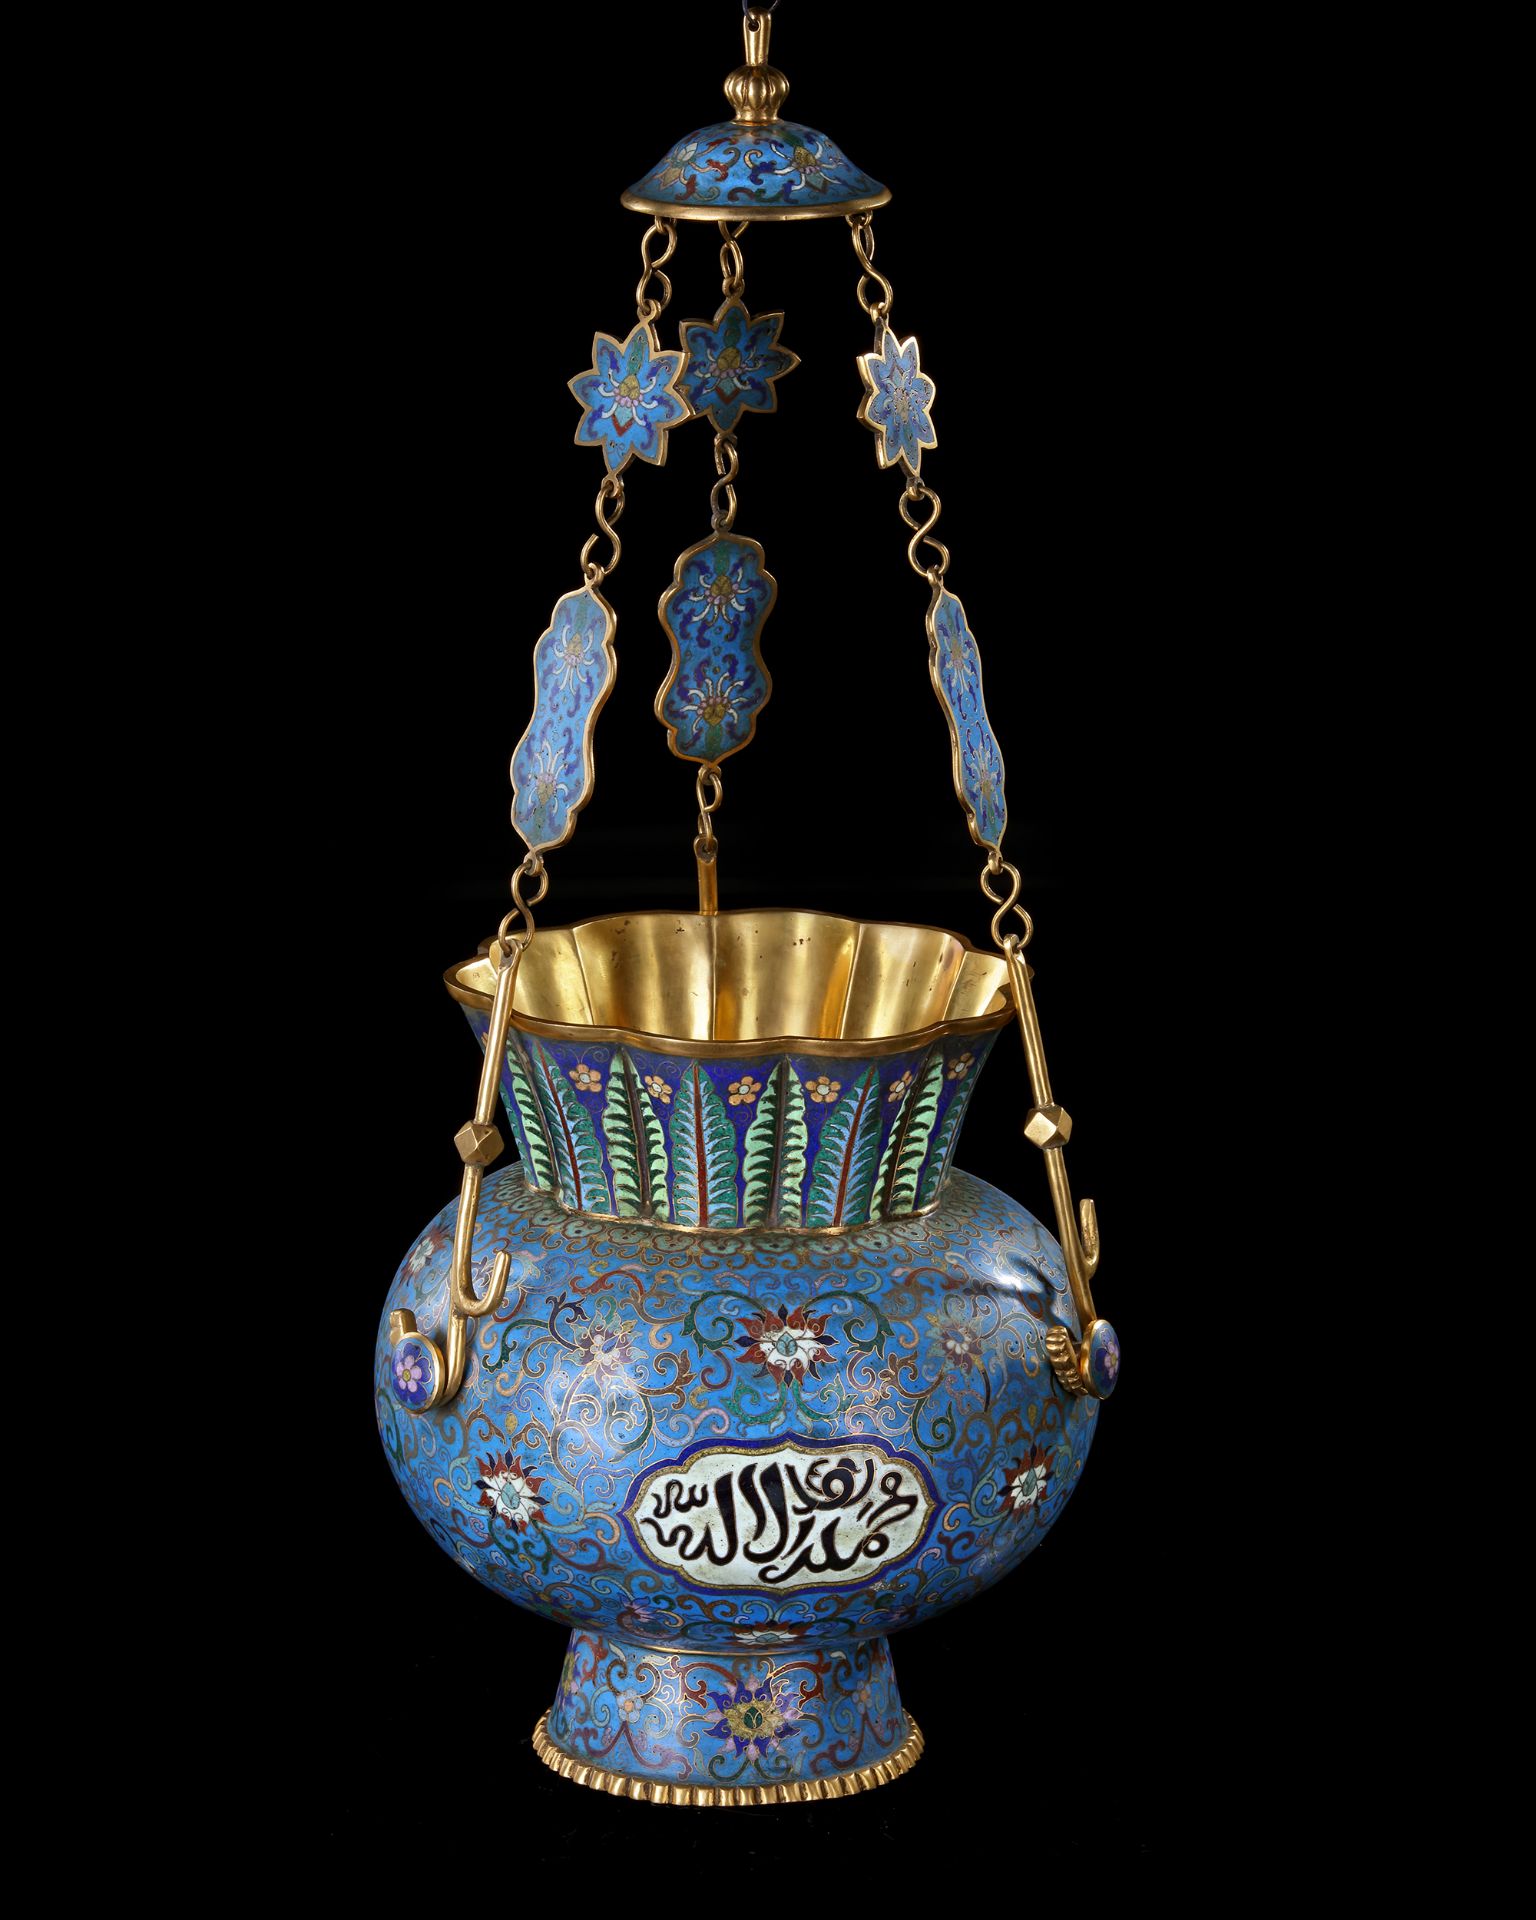 A CHINESE CLOISONNÉ MOSQUE LAMP FOR THE ISLAMIC MARKET, LATE 19TH CENTURY - Image 4 of 10